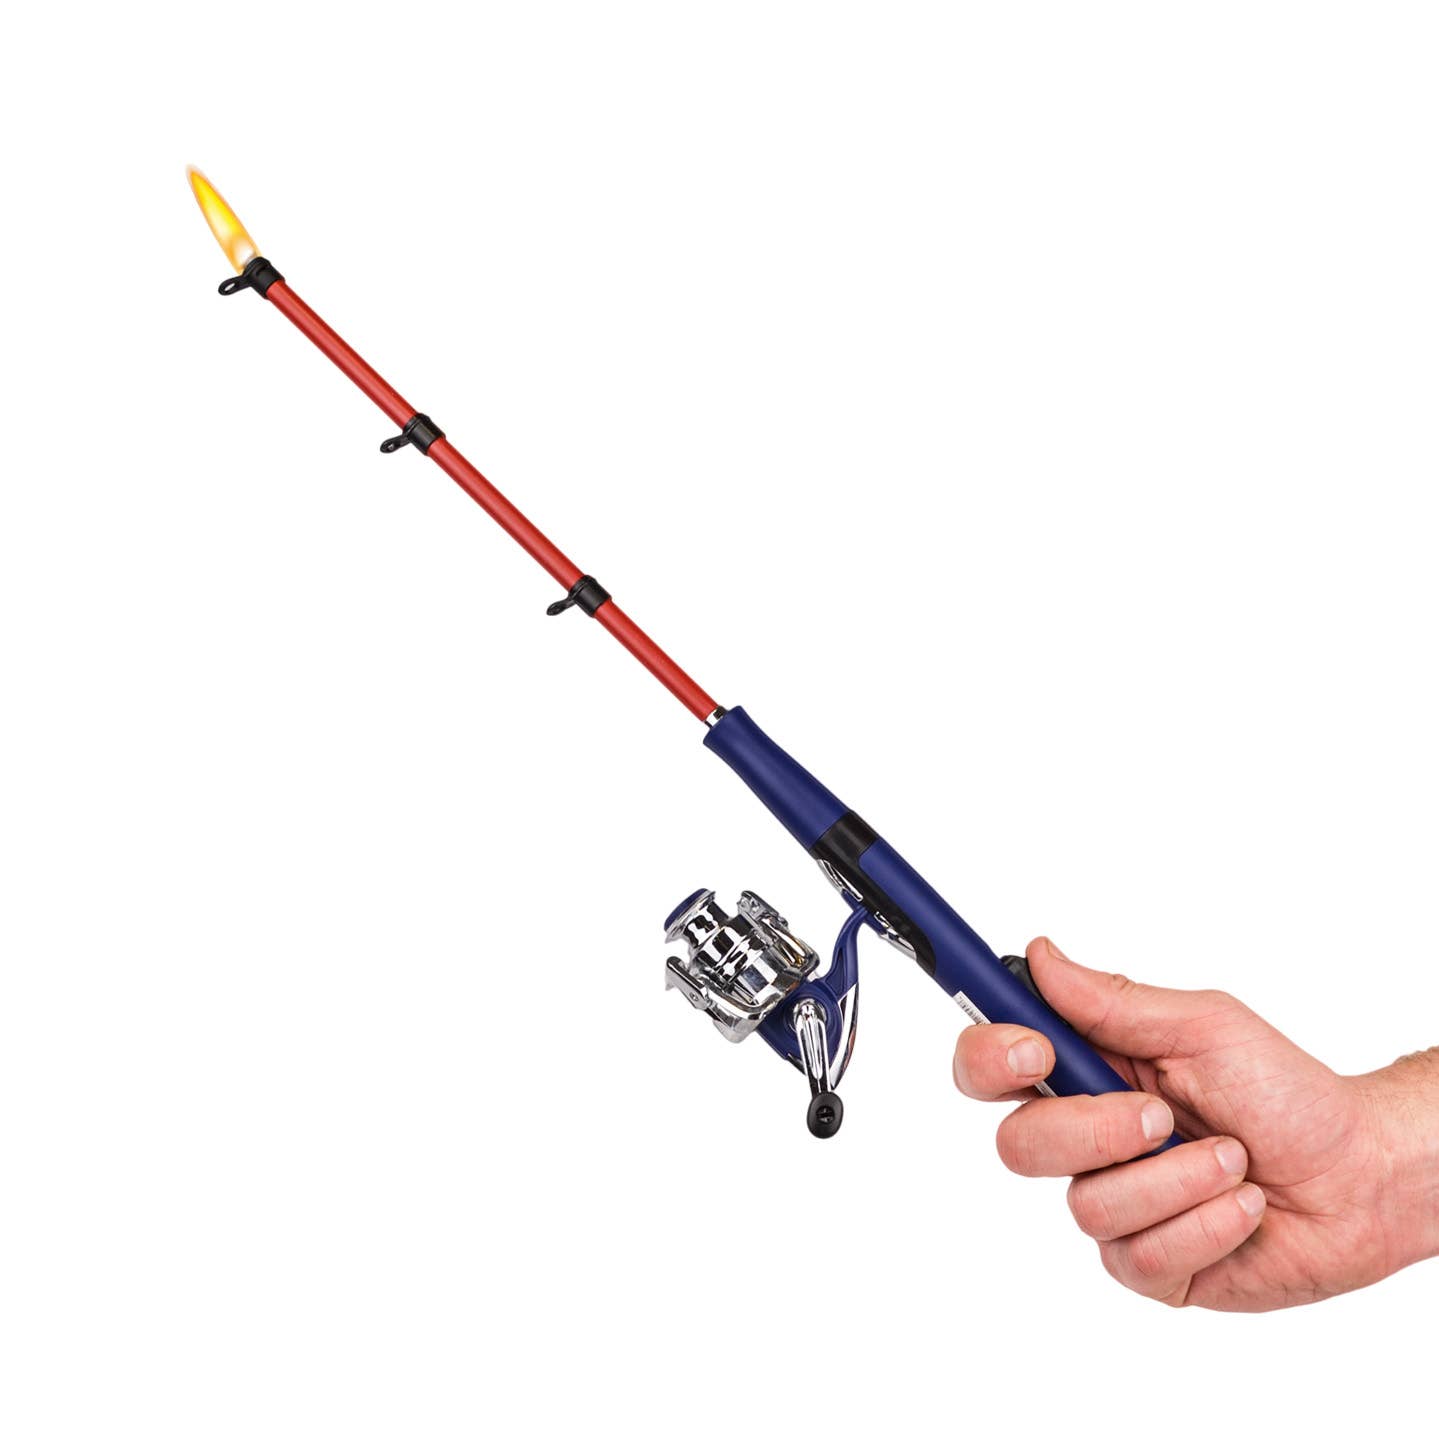 Open Face Fishing Pole BBQ Lighter-Multicolor